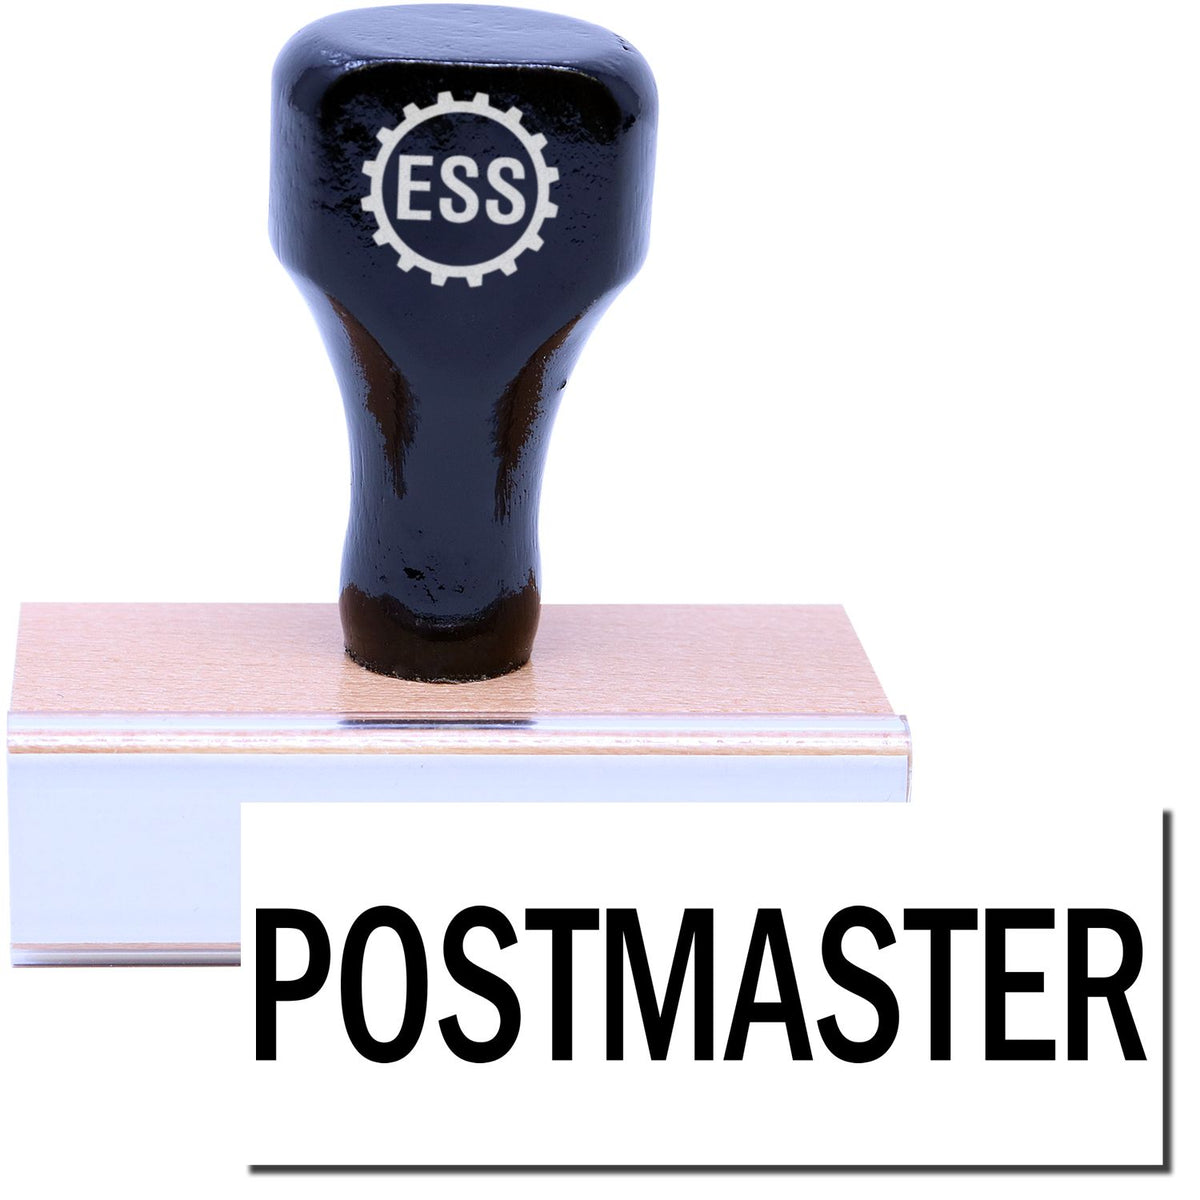 A stock office rubber stamp with a stamped image showing how the text &quot;POSTMASTER&quot; in a large font is displayed after stamping.